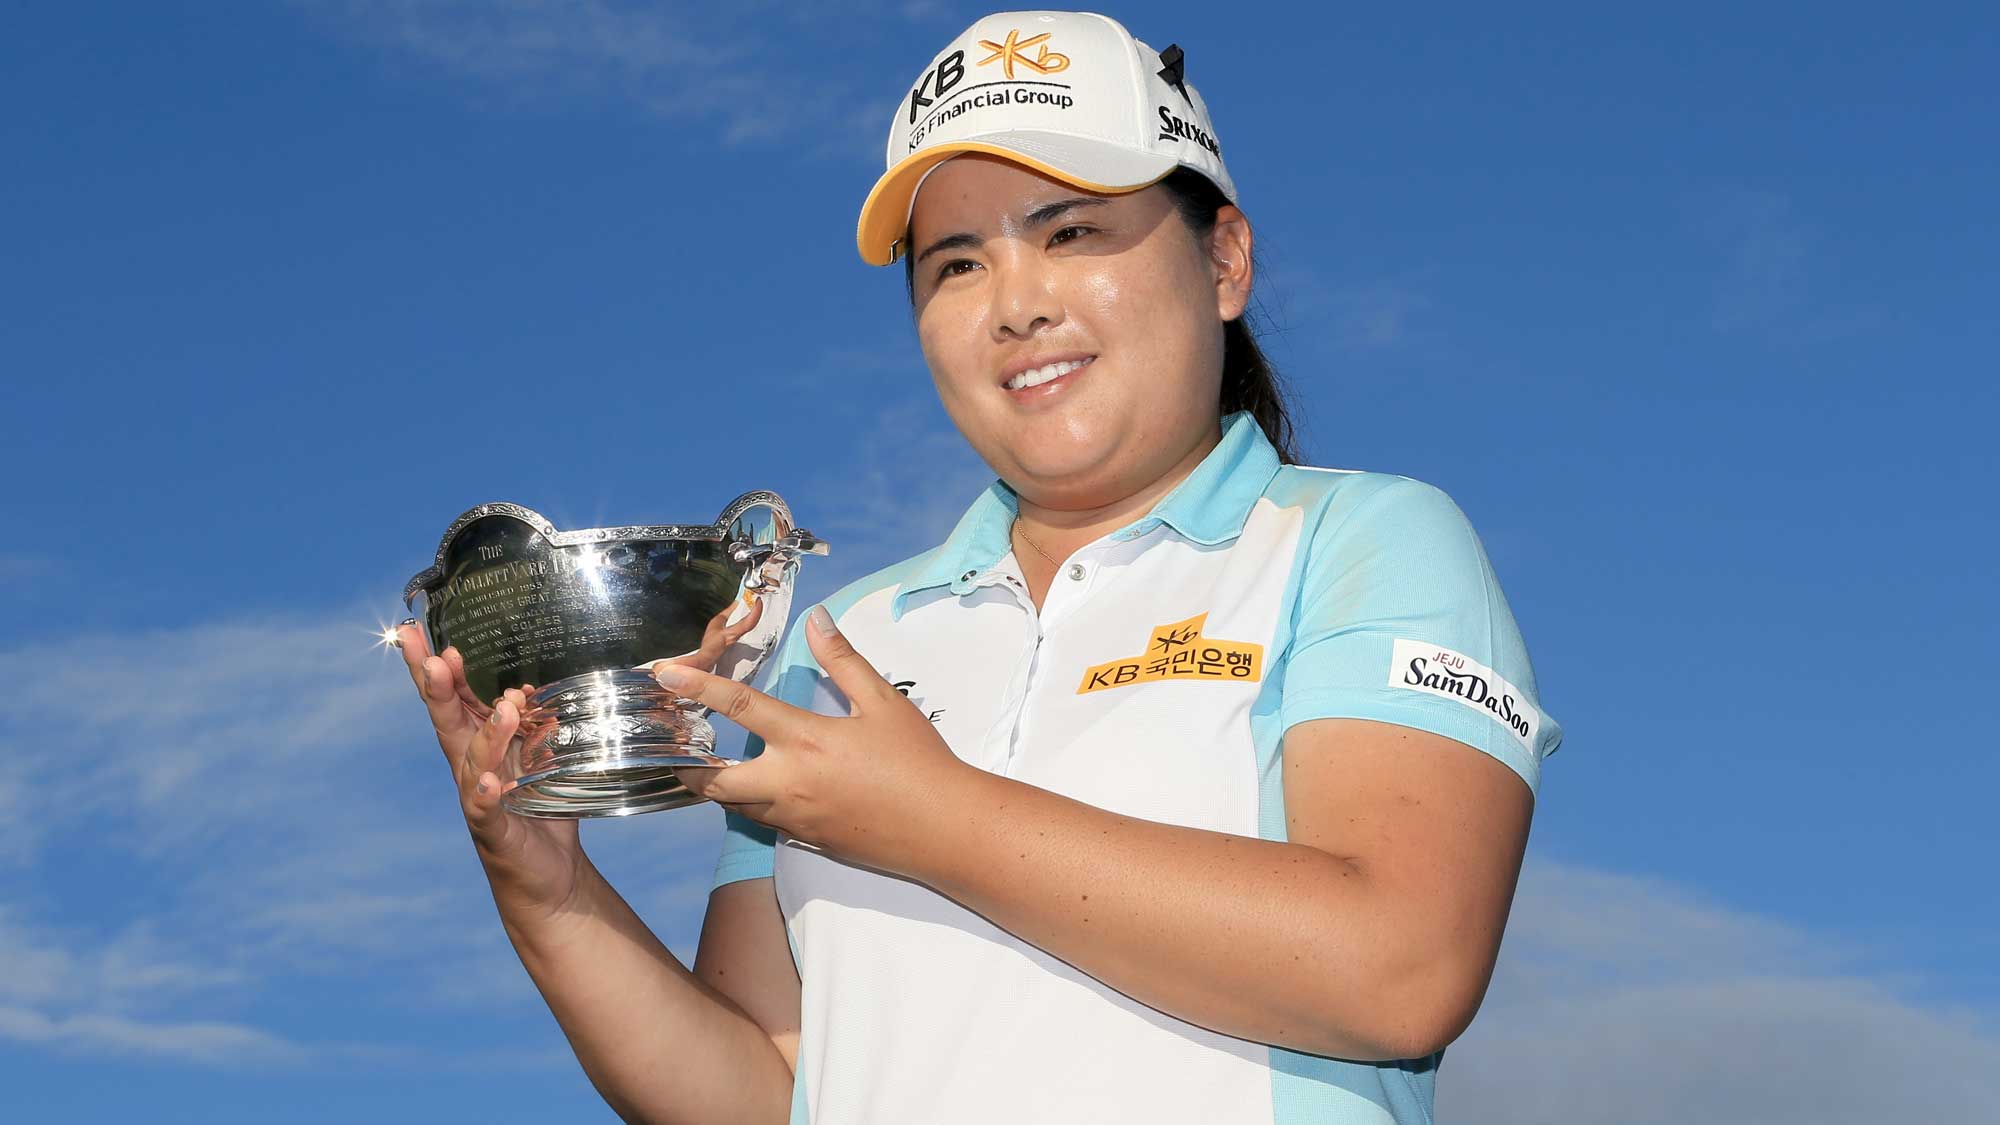 Inbee Park of South Korea poses with the Vare trophy during the final round of the CME Group Tour Championship at Tiburon Golf Club